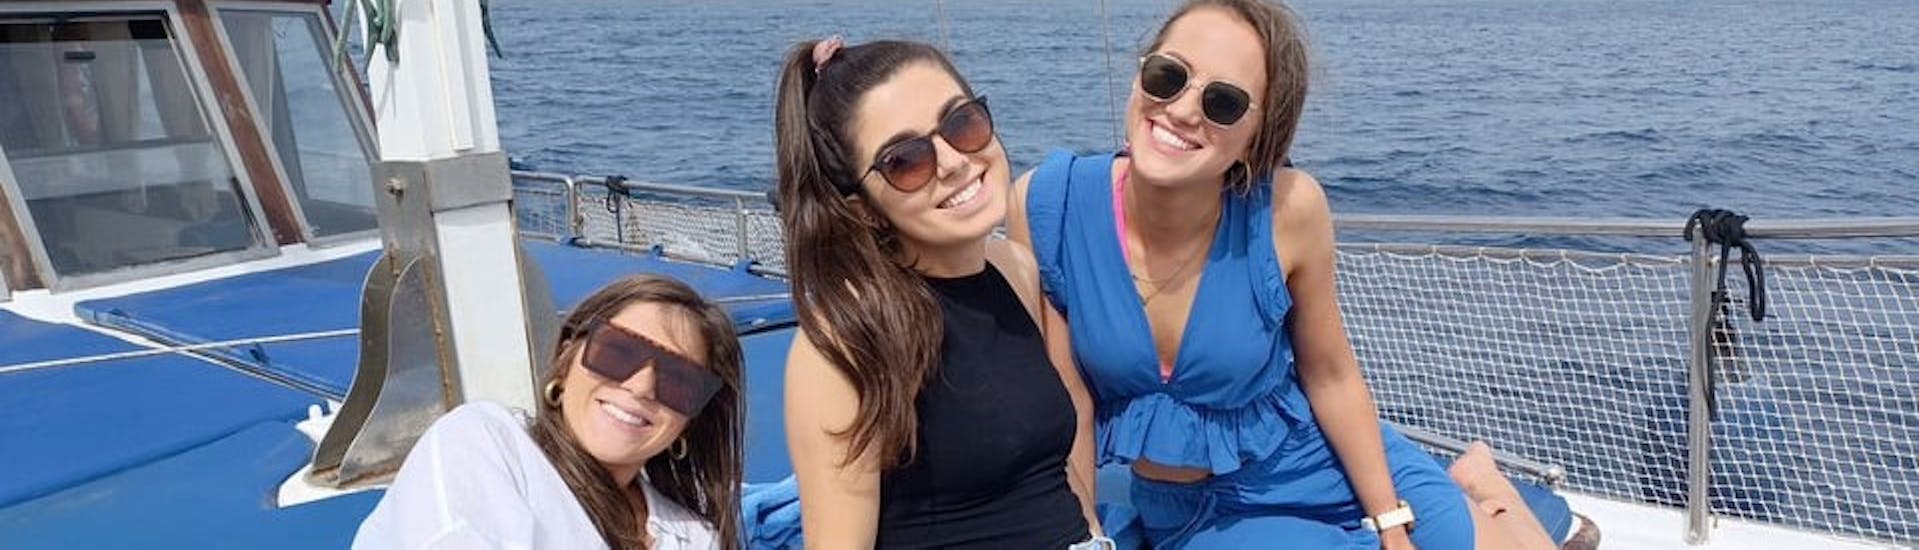 Three girls enjoying their time on the boat during the Boat Trip along the south Coast of Mykonos to Delos with Mykonos Cruises.